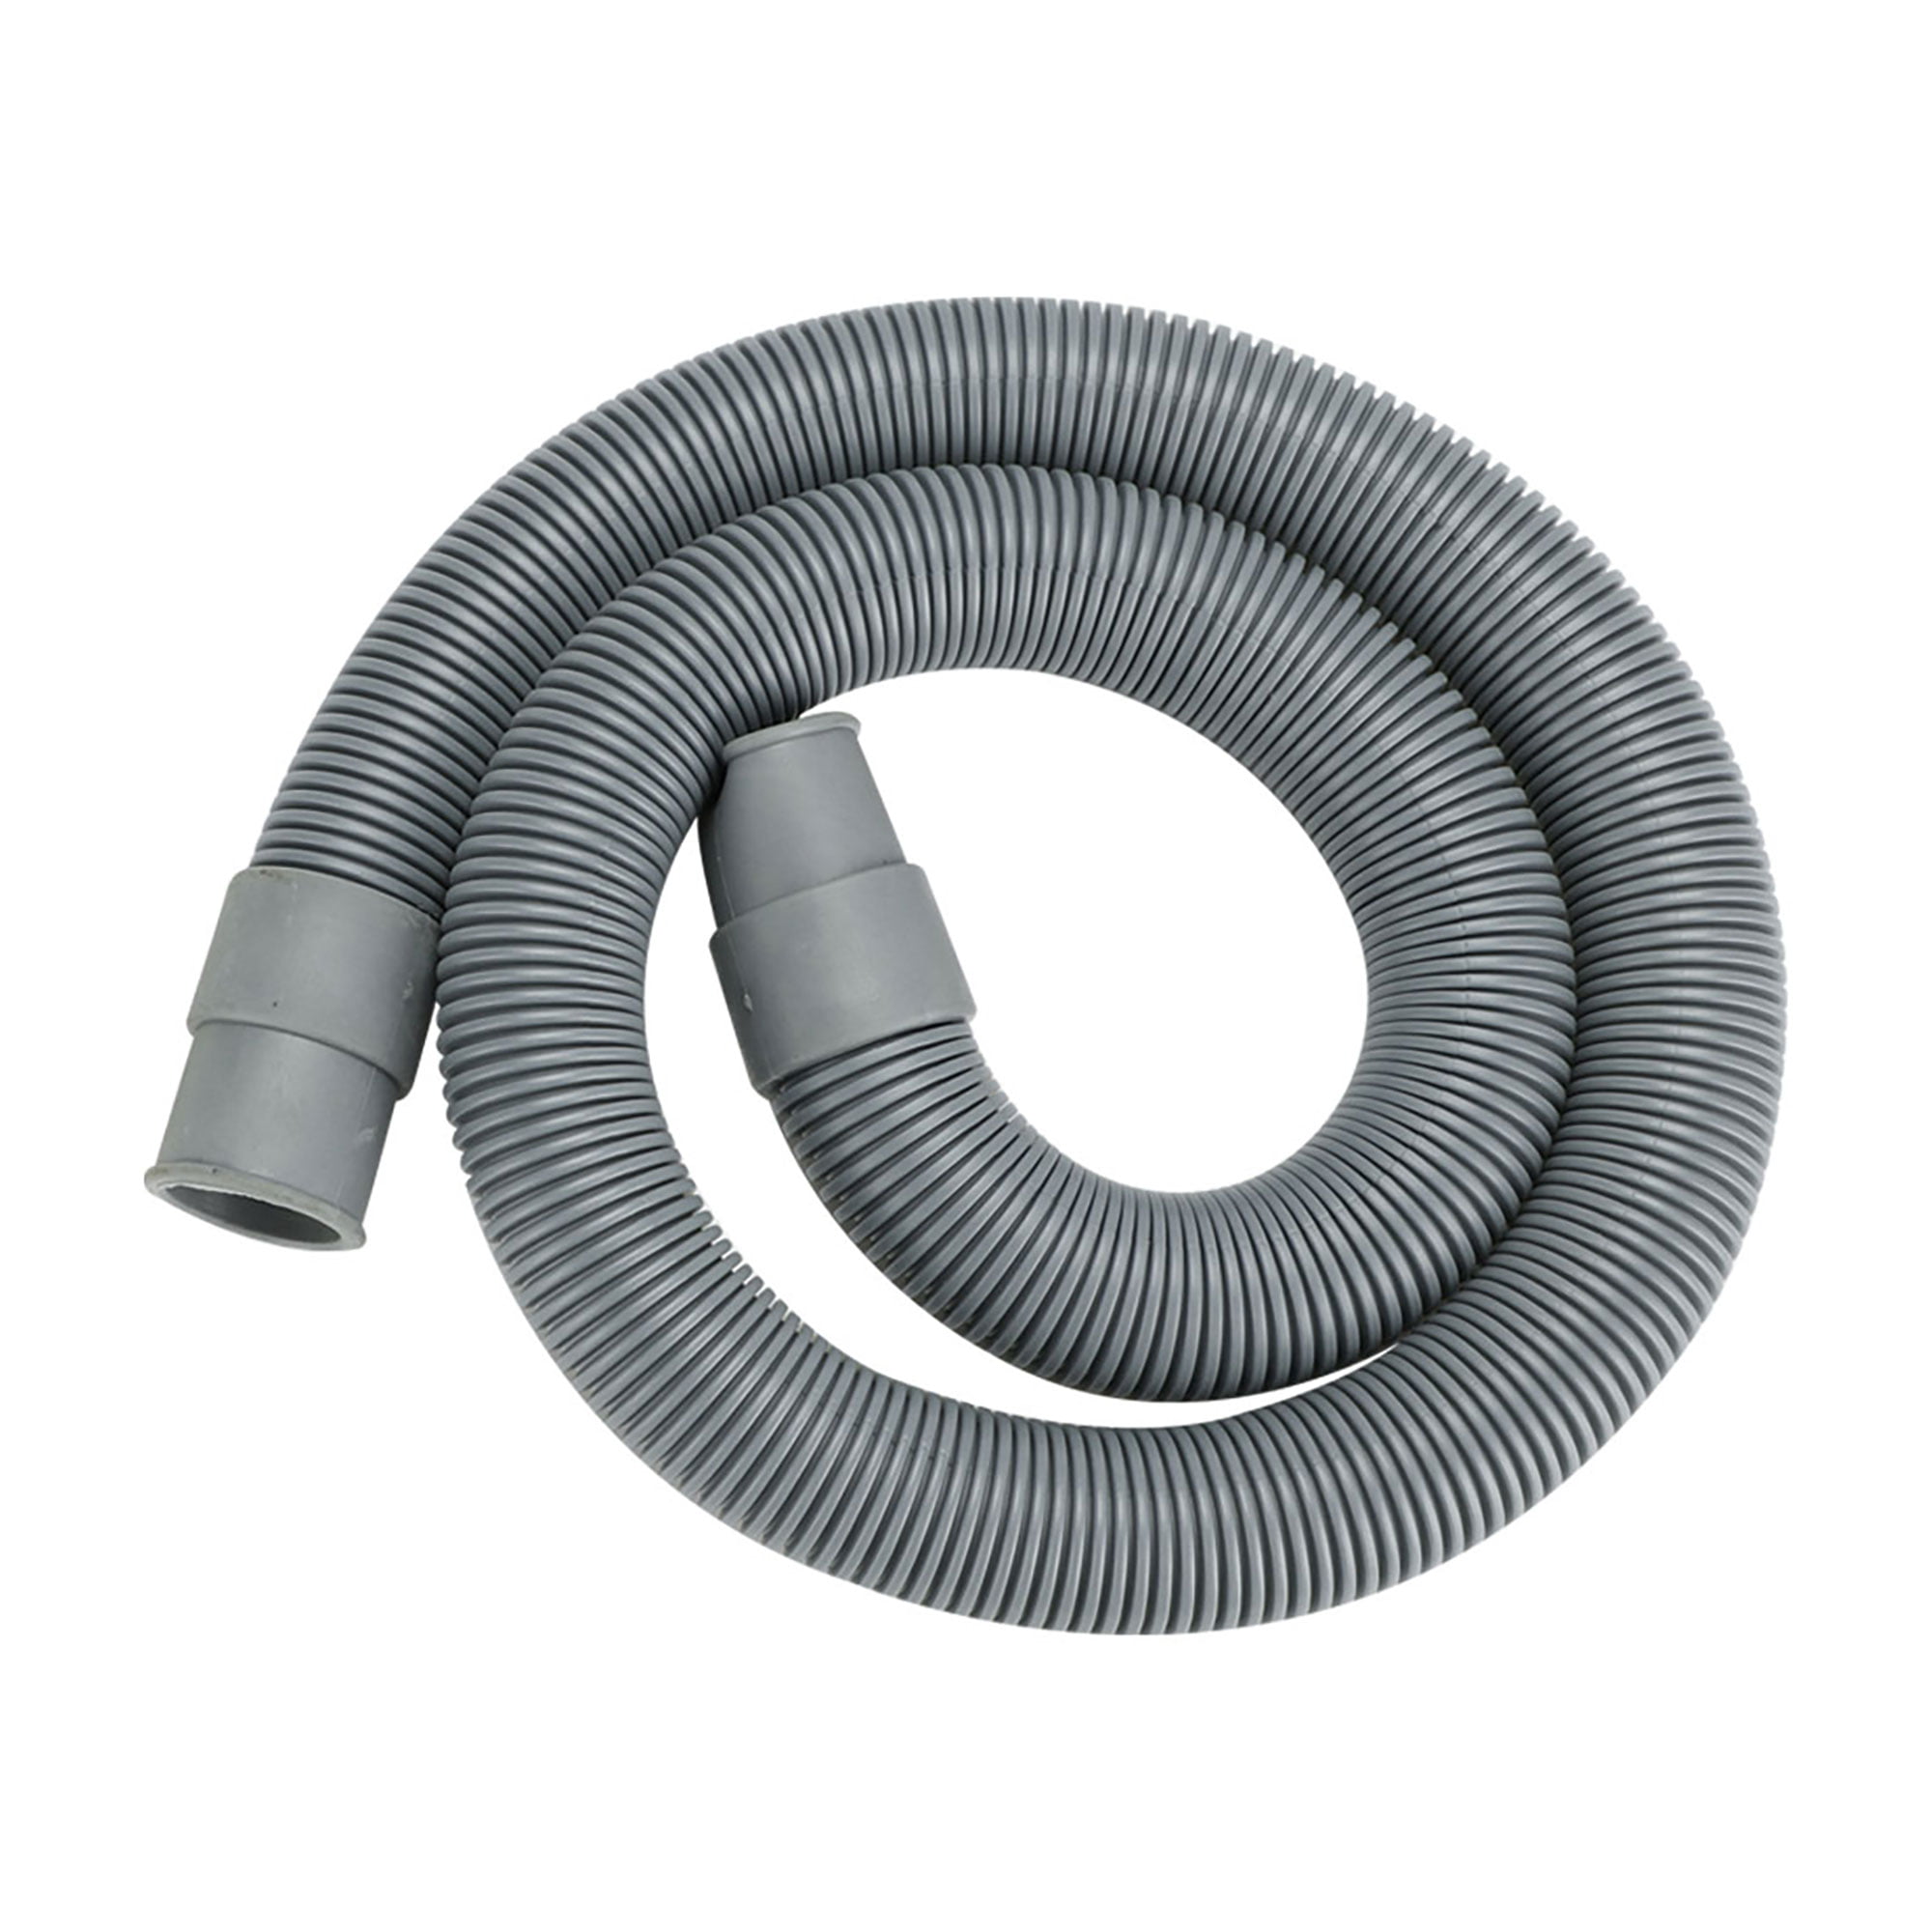 26ft Universal Wash Machine Drain Hose Extension Outlet Water Connection Discharge Hose